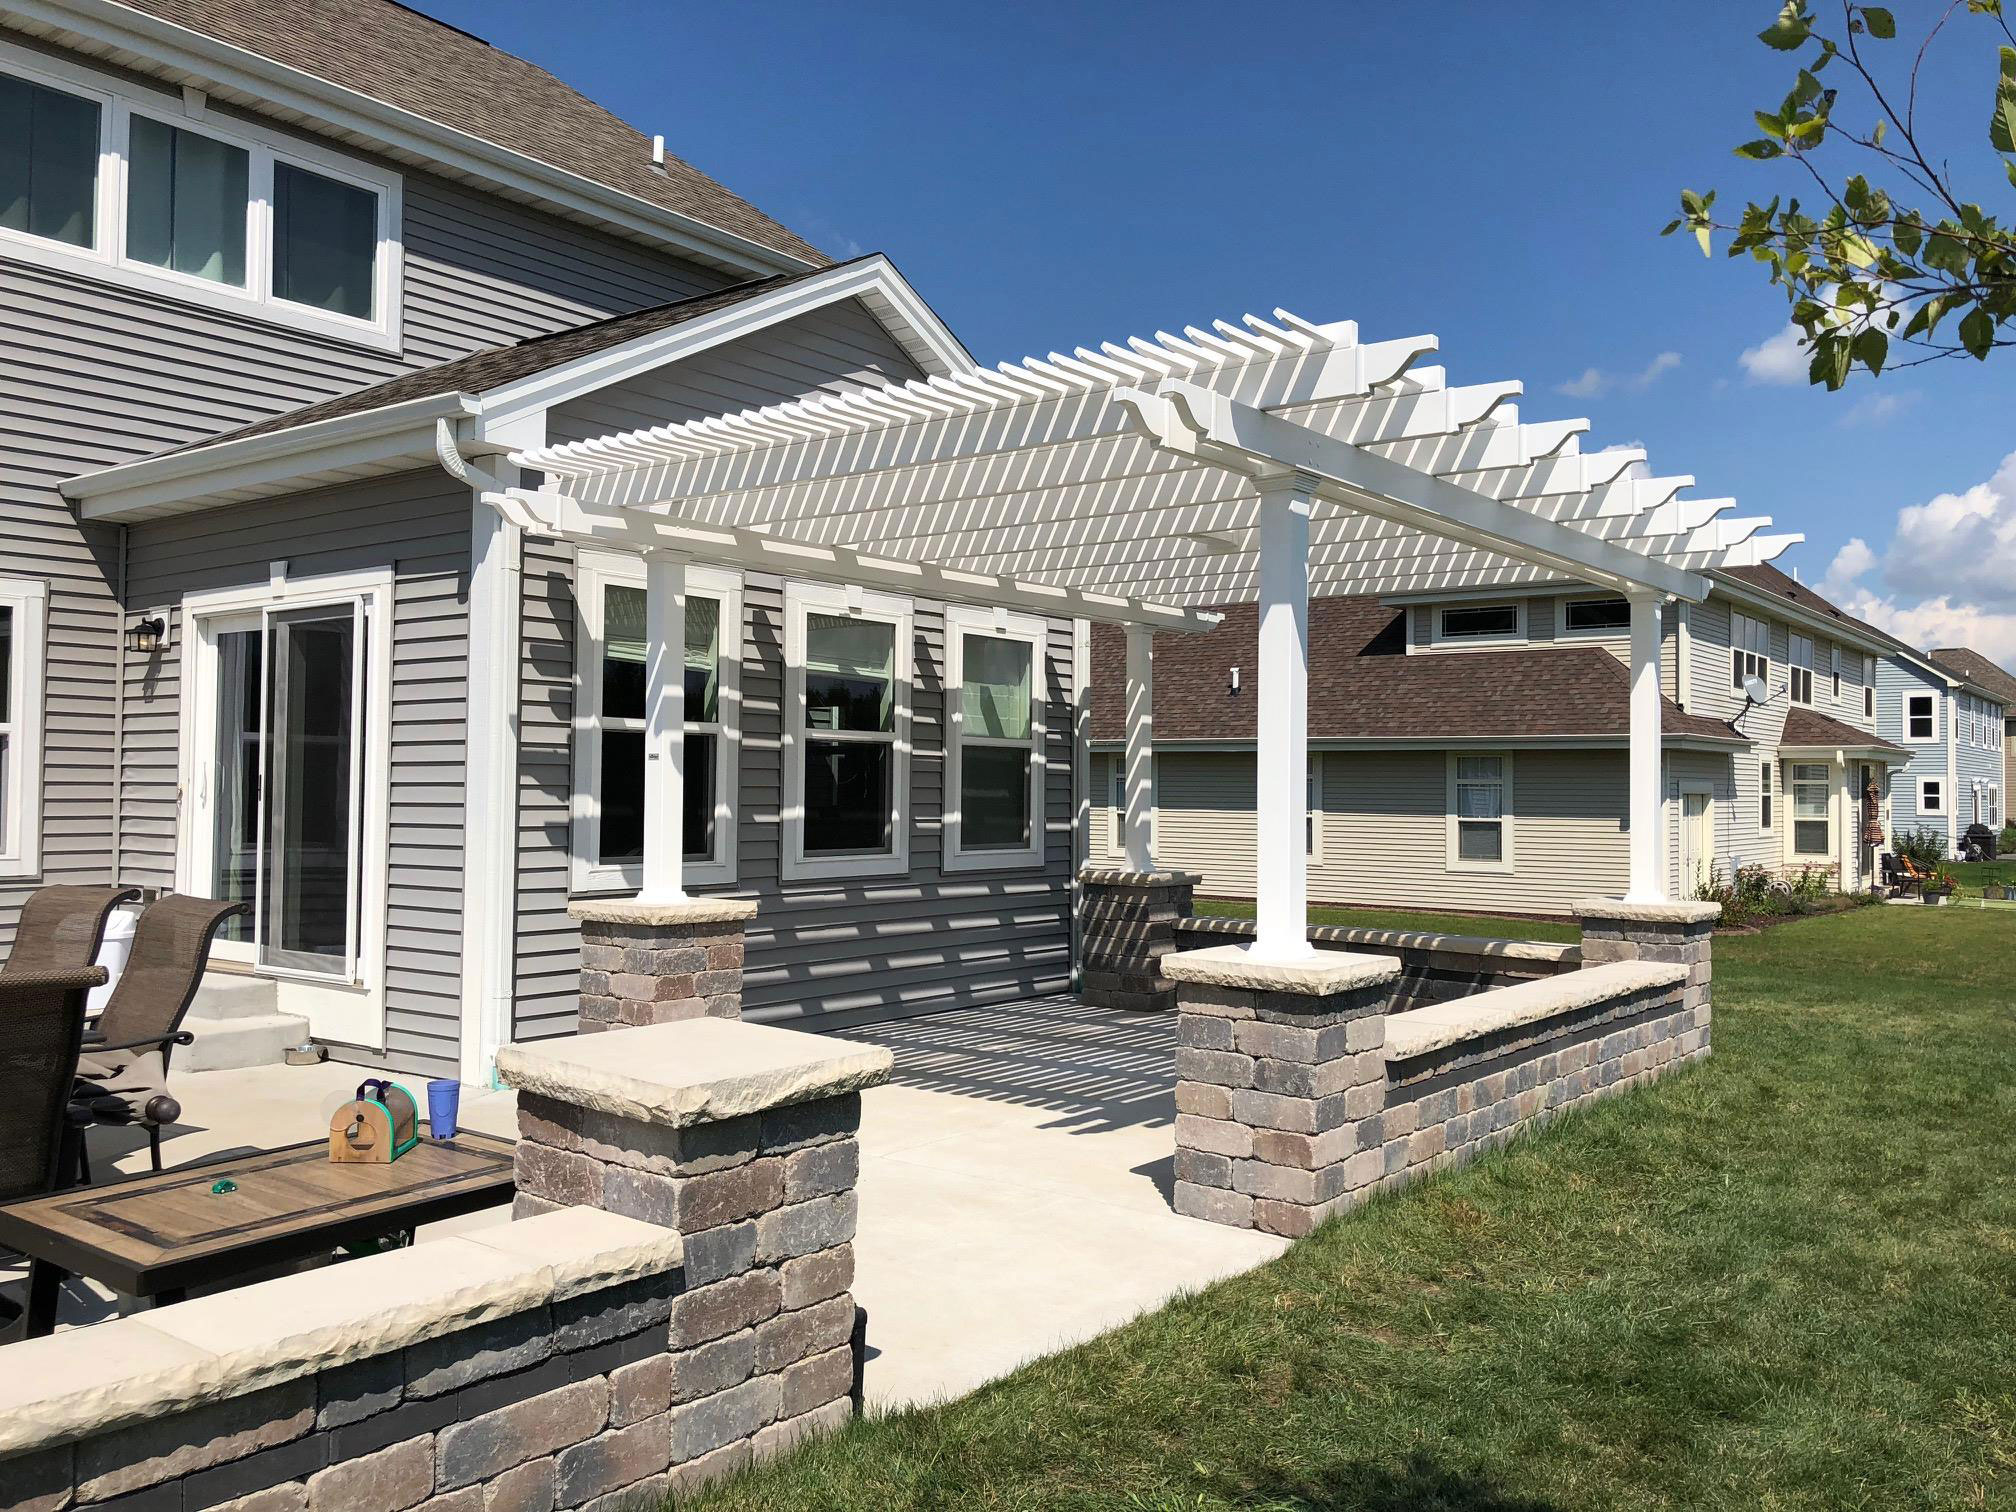 pergola over a patio on landscape columns with a foot of overhang on the roof profile